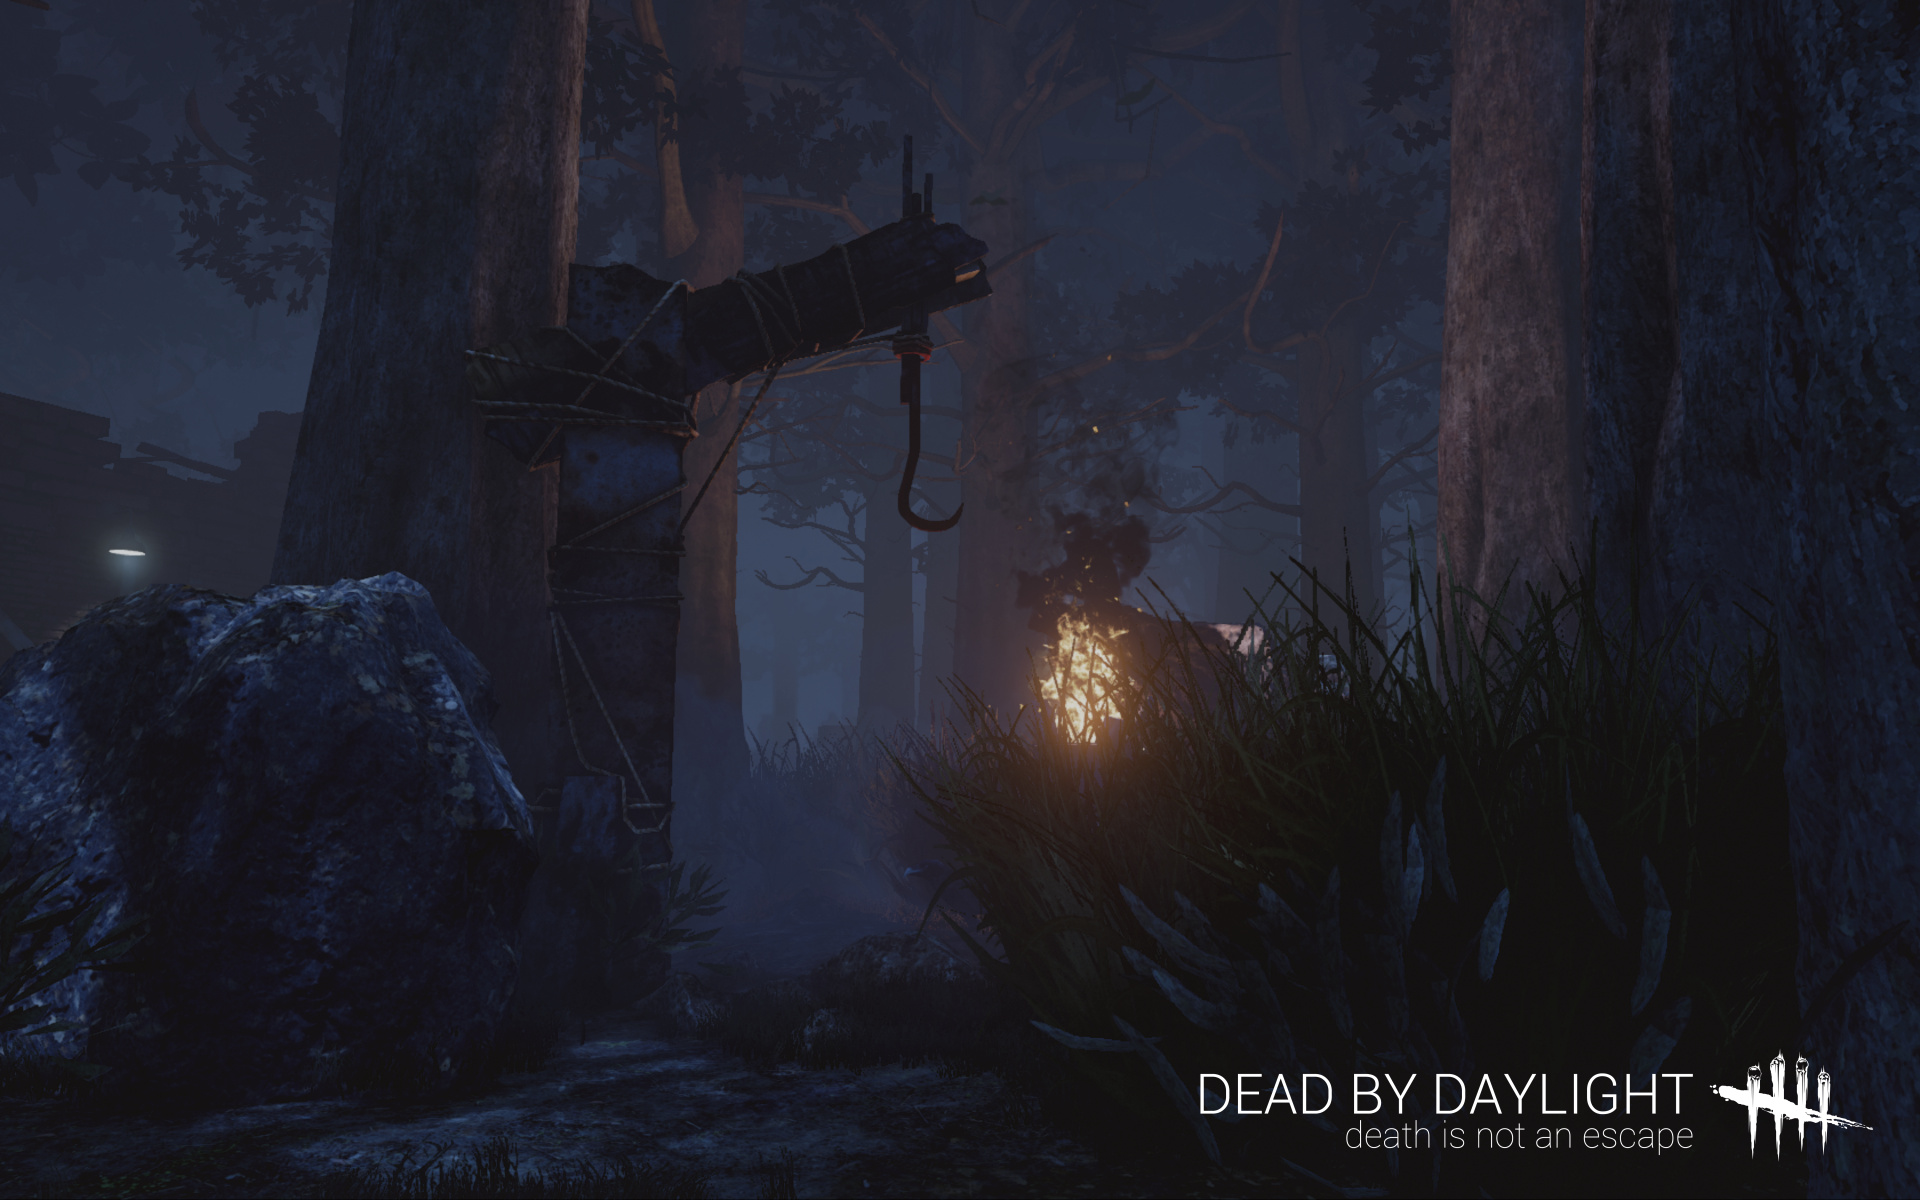 Dead by Daylight (PS4 / PlayStation 4) Game Profile | News, Reviews